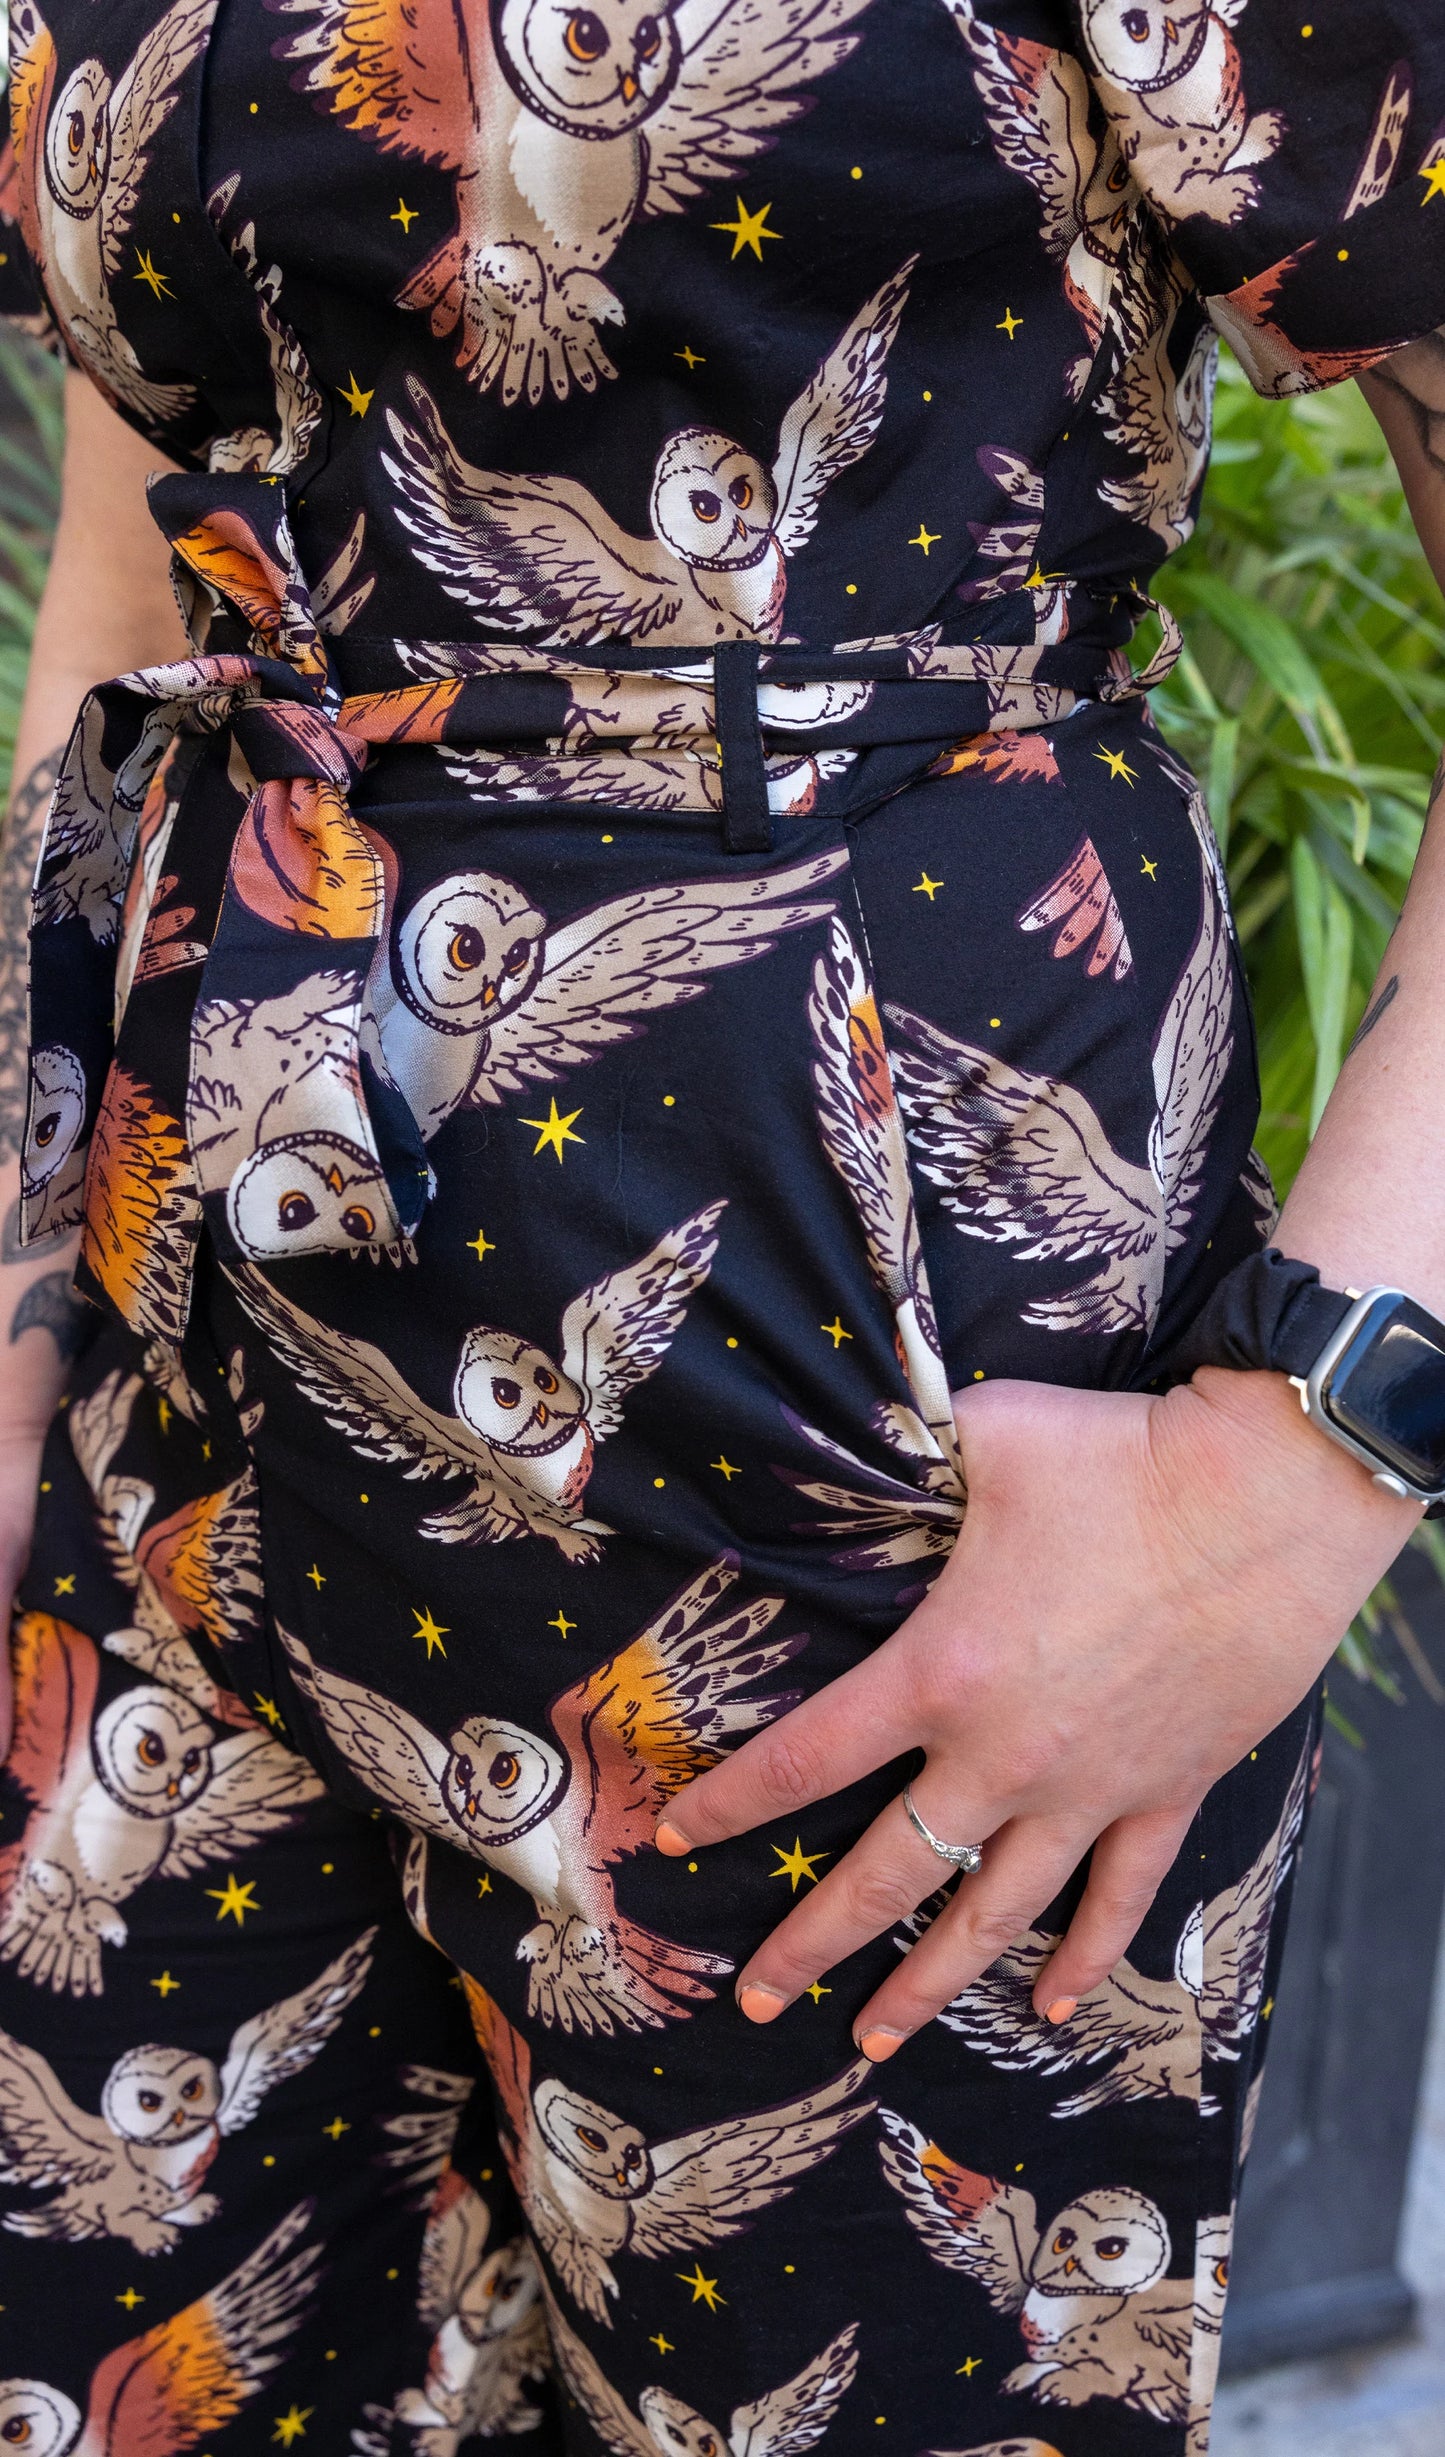 Run & Fly - What a Hoot Owl Stretch Zip Jumpsuit